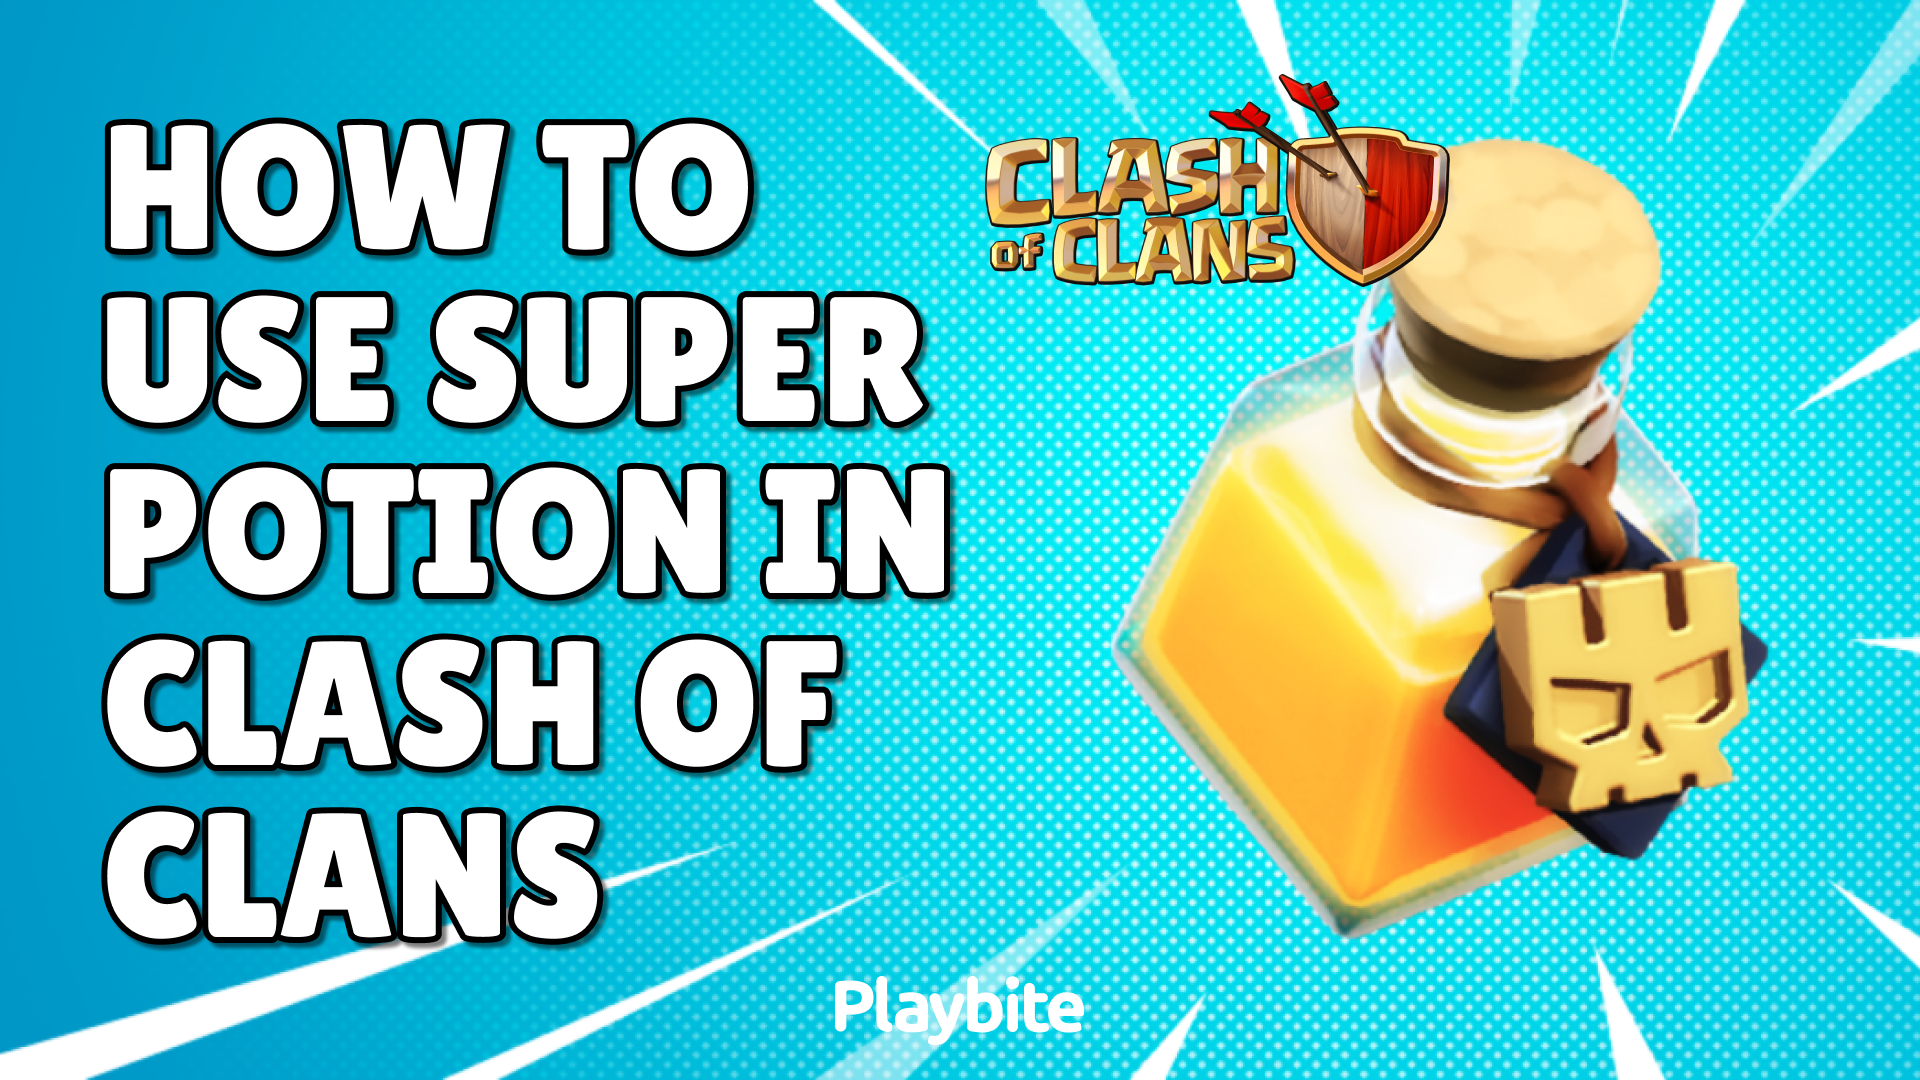 How To Use Super Potion In Clash Of Clans